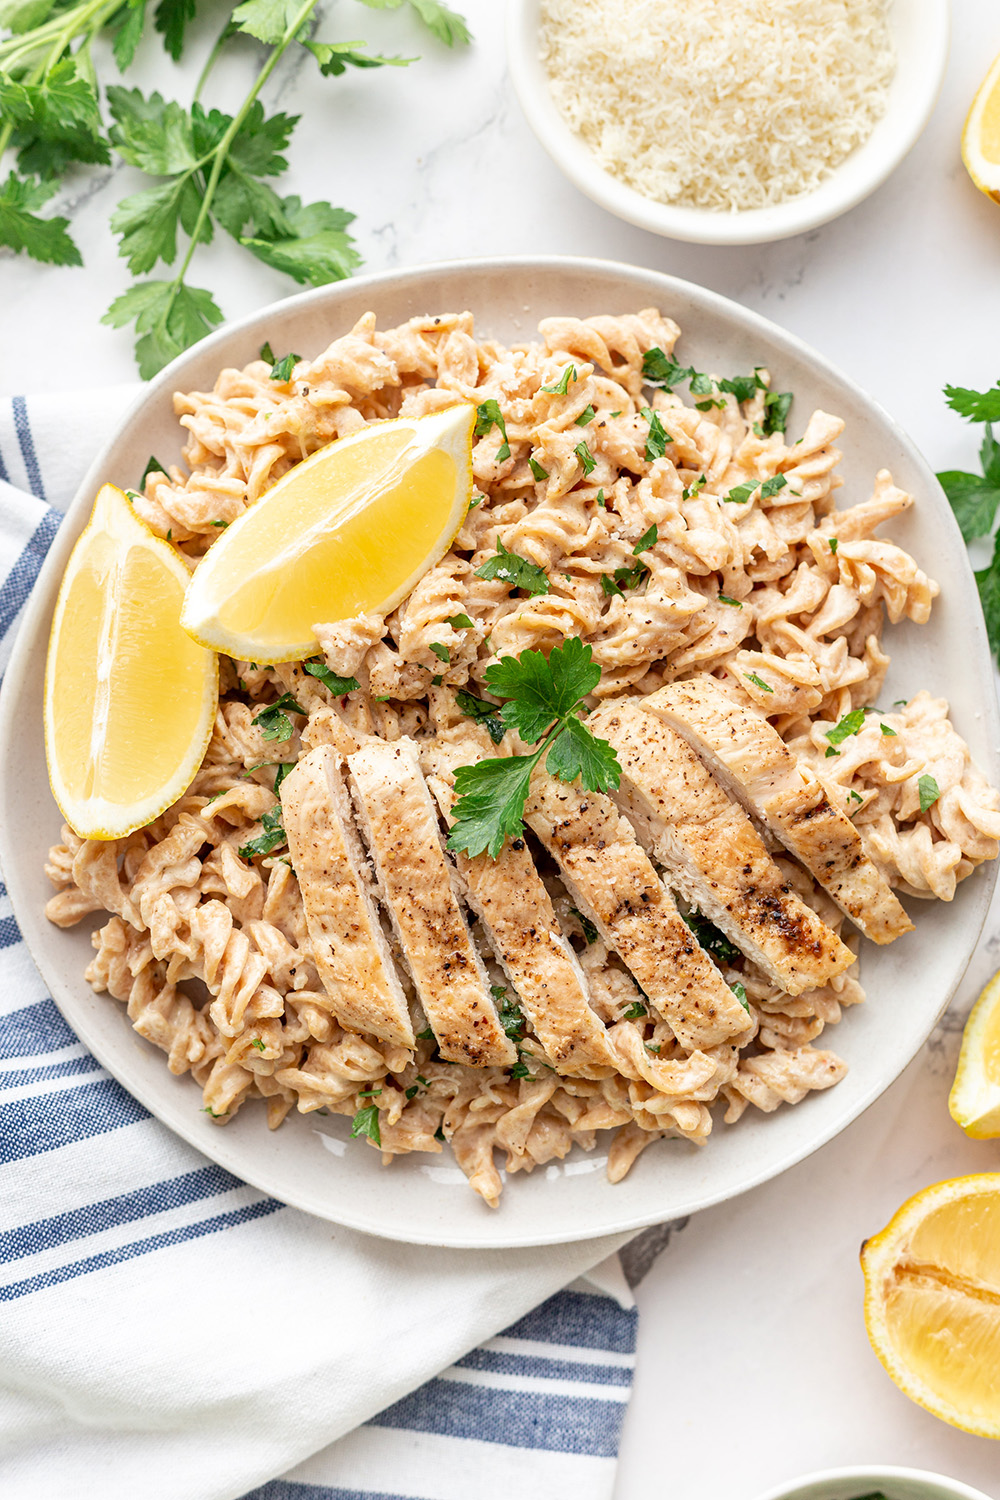 Creamy Cauliflower Rotini pasta is topped with pan-seared chicken breast and parmesan cheese